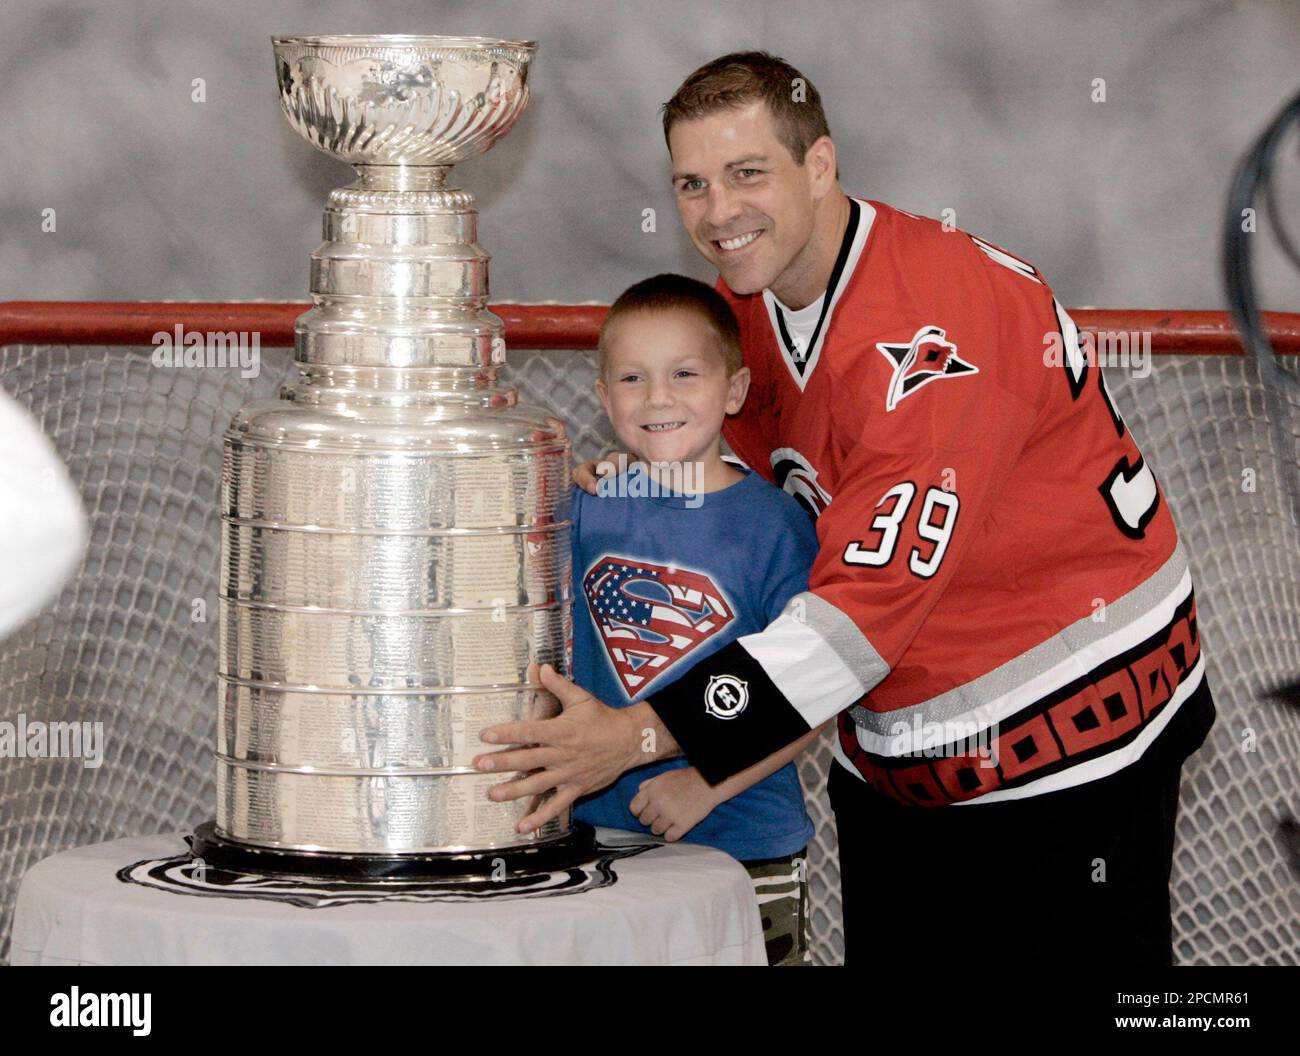 https://c8.alamy.com/comp/2PCMR61/former-carolina-hurricanes-hockey-player-doug-weight-now-on-the-roster-of-the-st-louis-blues-poses-with-the-stanley-cup-with-six-year-old-benjamin-opich-of-chesterfield-mo-thursday-aug-17-2006-in-st-louis-weight-has-rejoined-his-former-team-the-blues-after-helping-carolina-win-hockeys-stanley-cup-benjamin-is-a-member-of-the-rockets-hockey-club-in-the-minimights-division-in-st-louis-ap-photojames-a-finley-2PCMR61.jpg